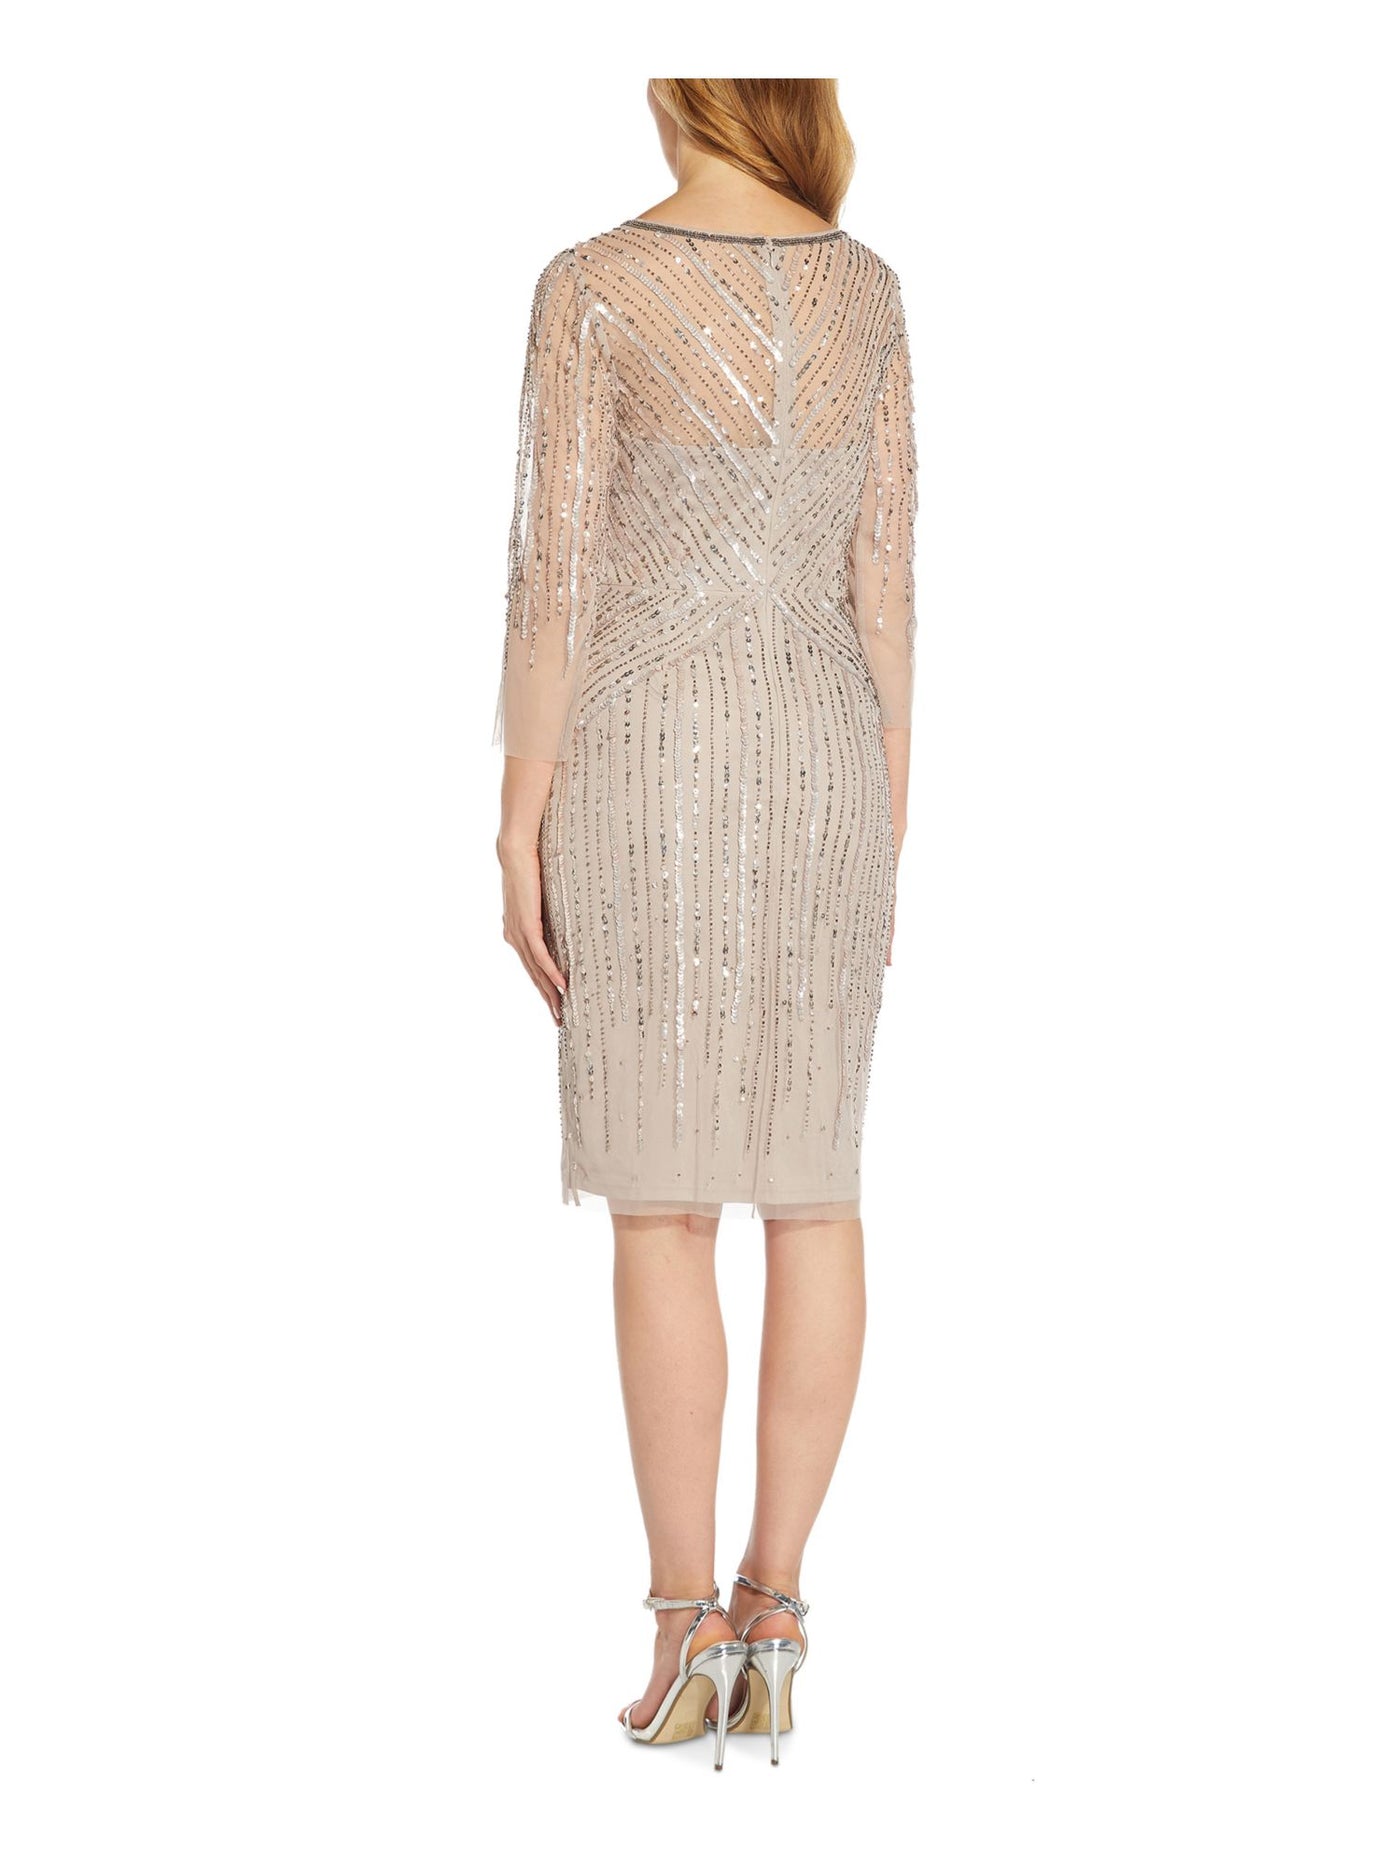 ADRIANNA PAPELL Womens Beige Sequined Zippered Lined 3/4 Sleeve V Neck Knee Length Cocktail Sheath Dress 4